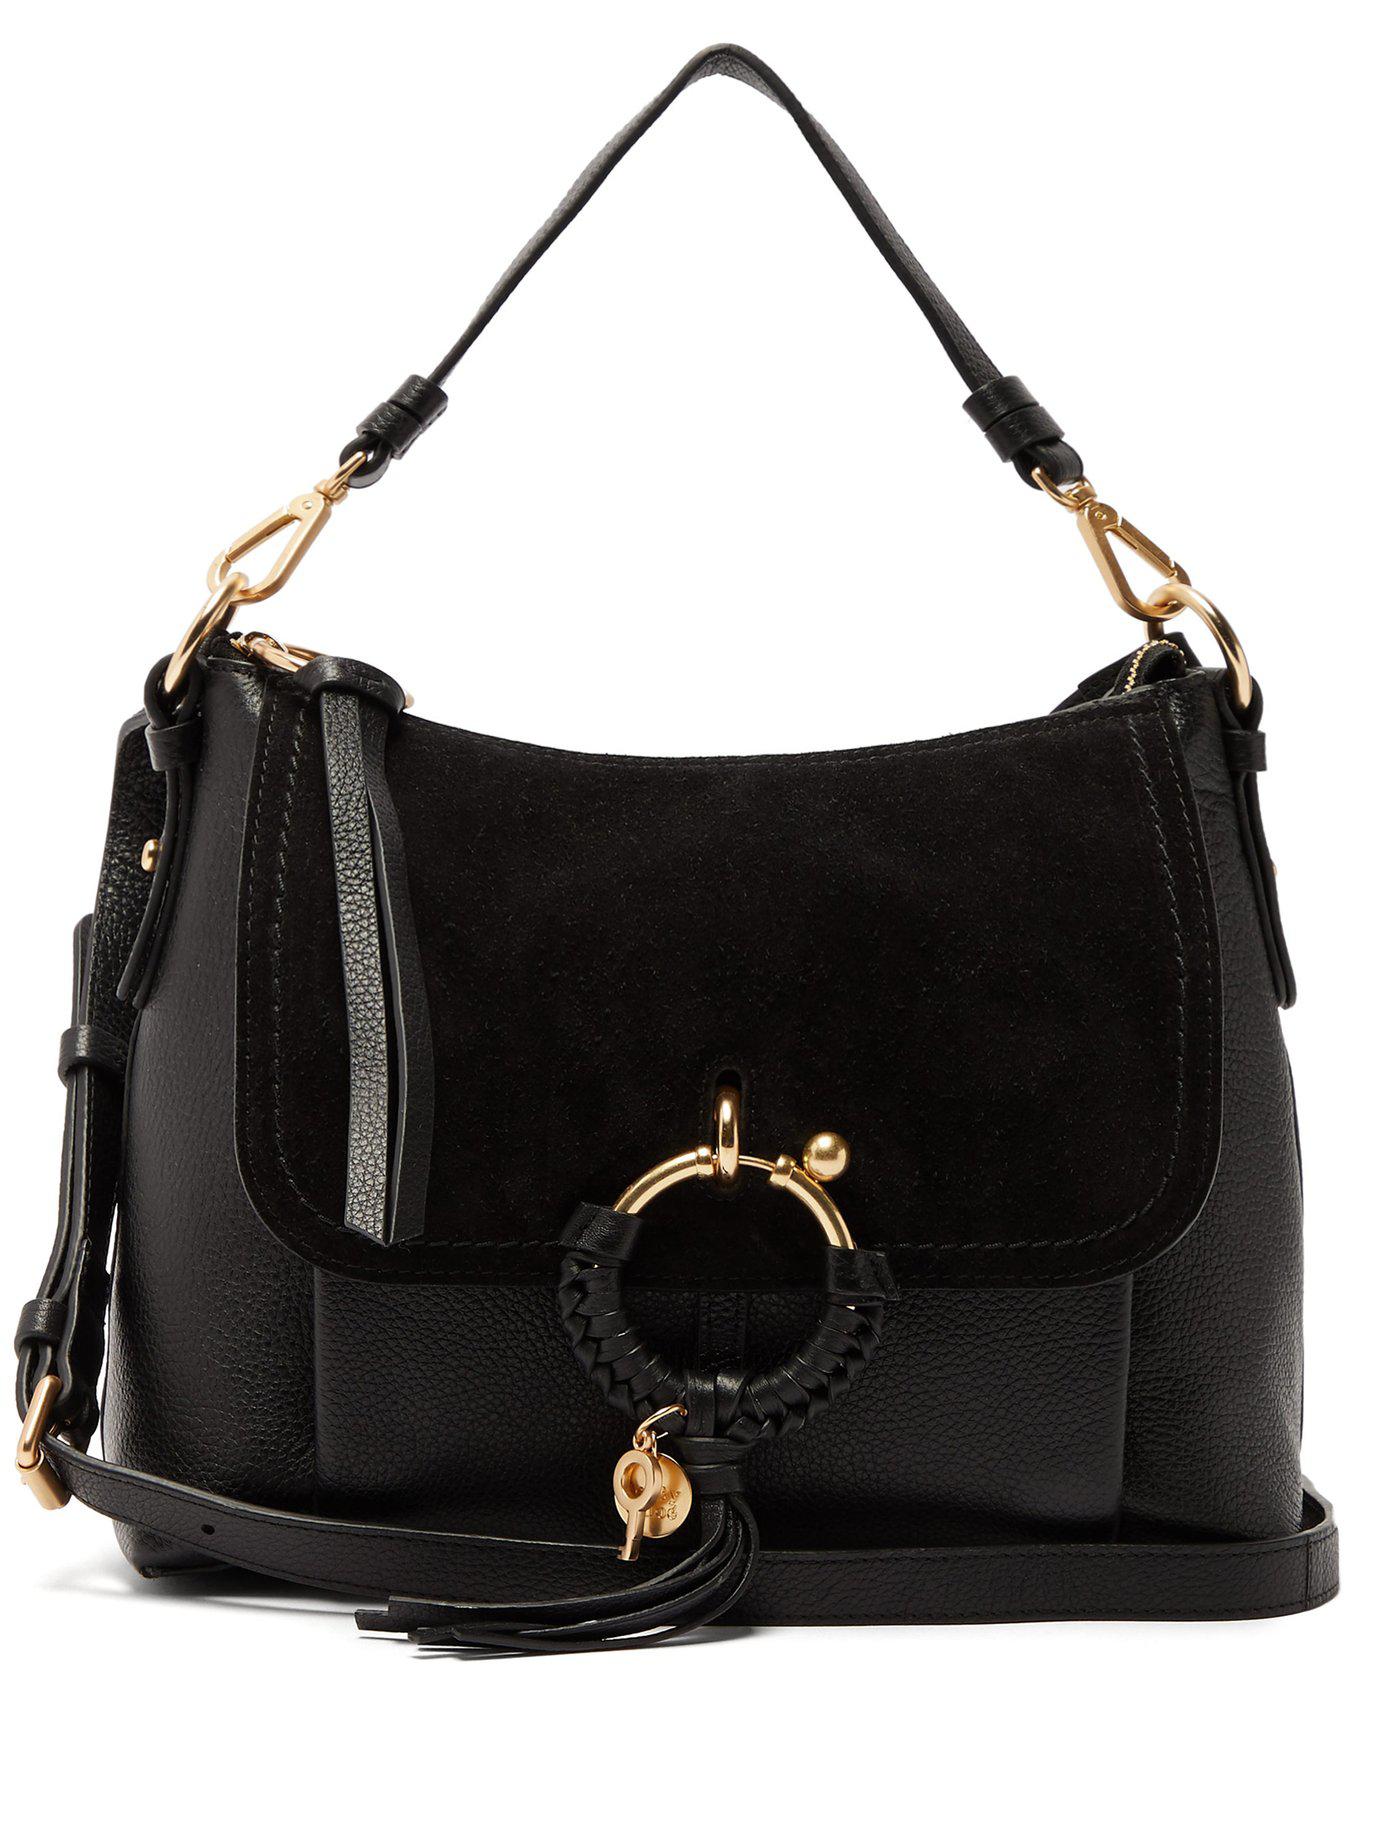 See By Chloé Joan Small Leather Shoulder Bag in Black | Lyst